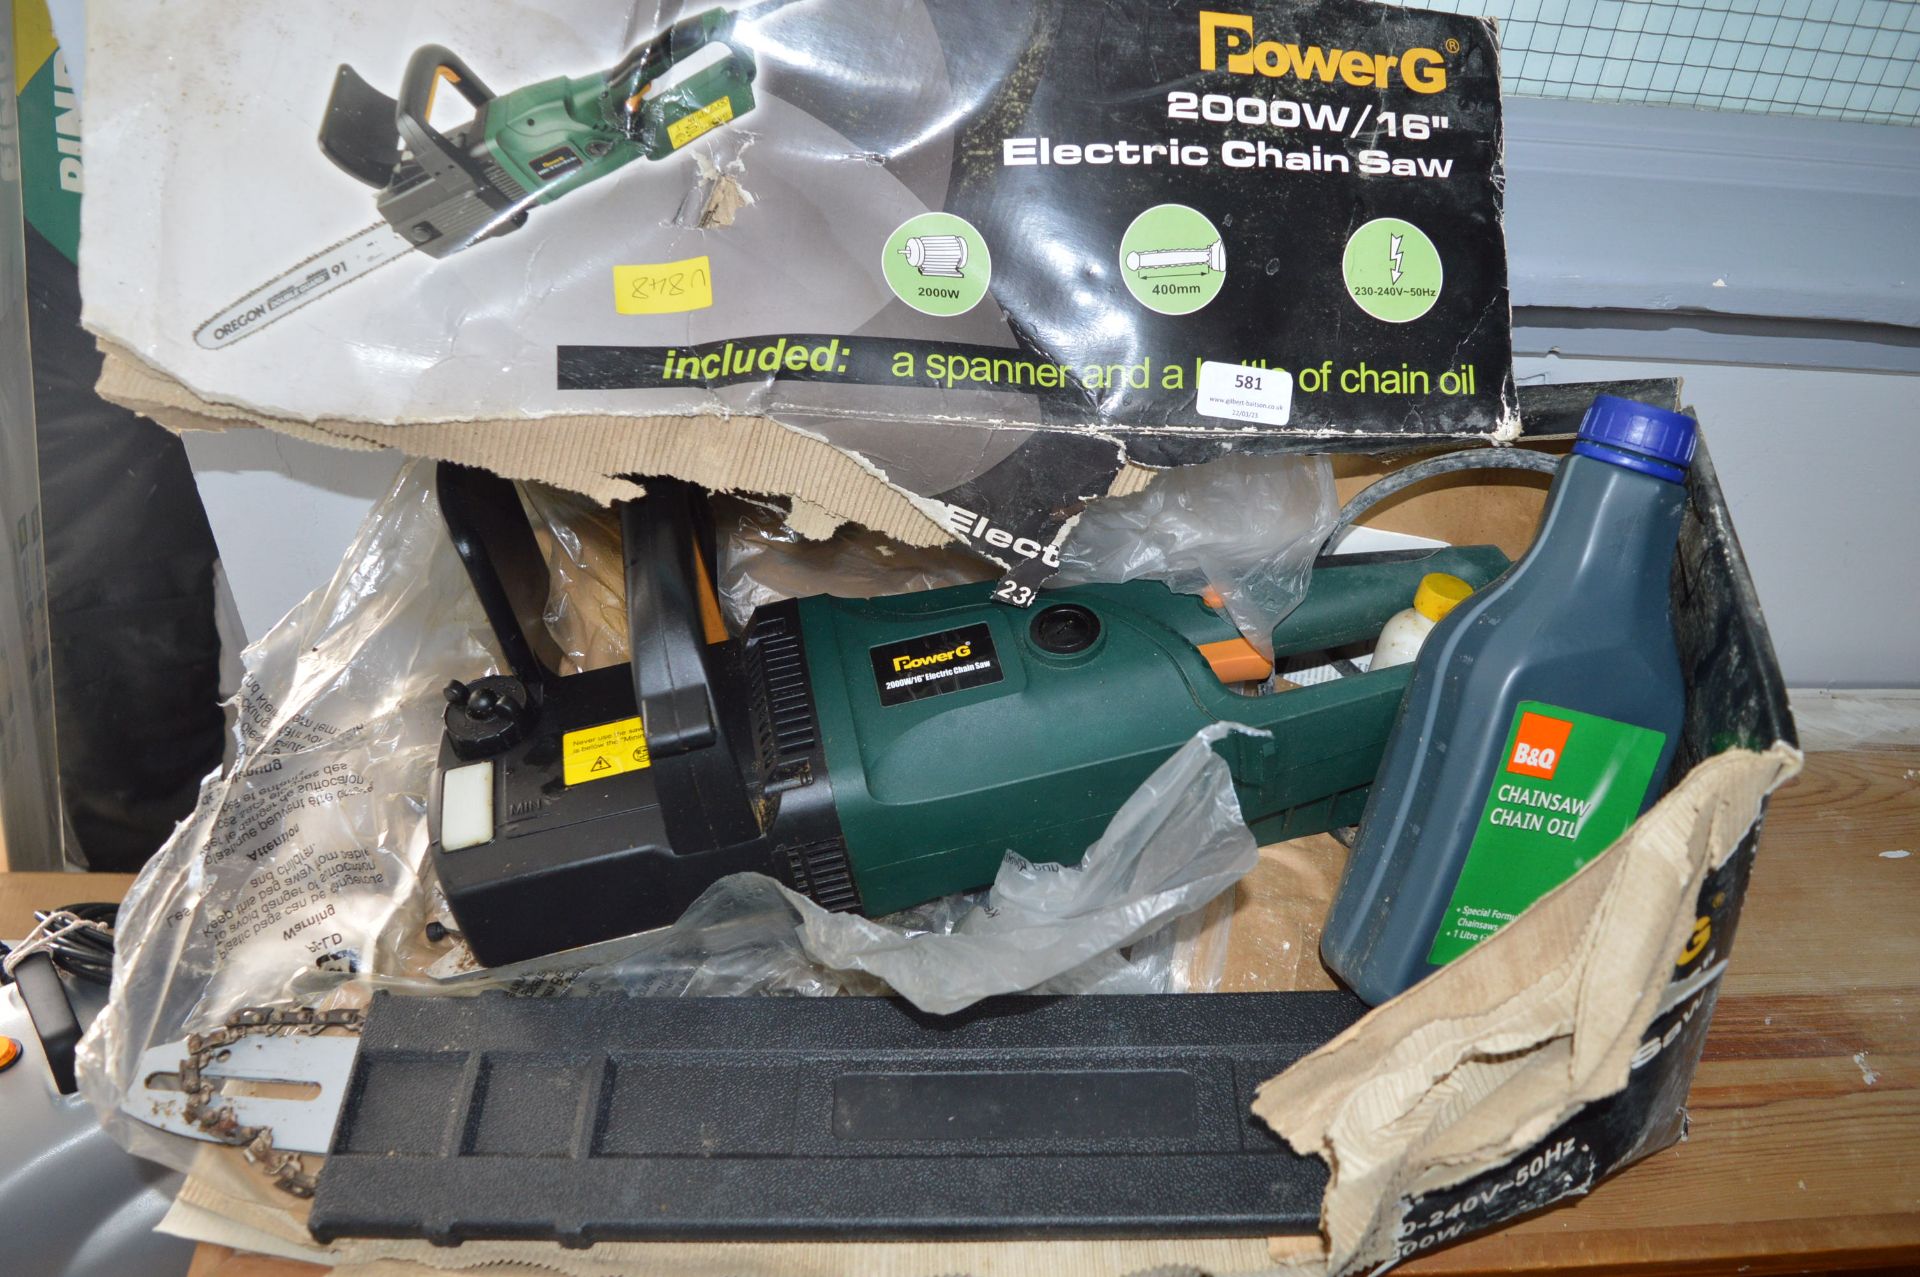 Power G Electric Chainsaw